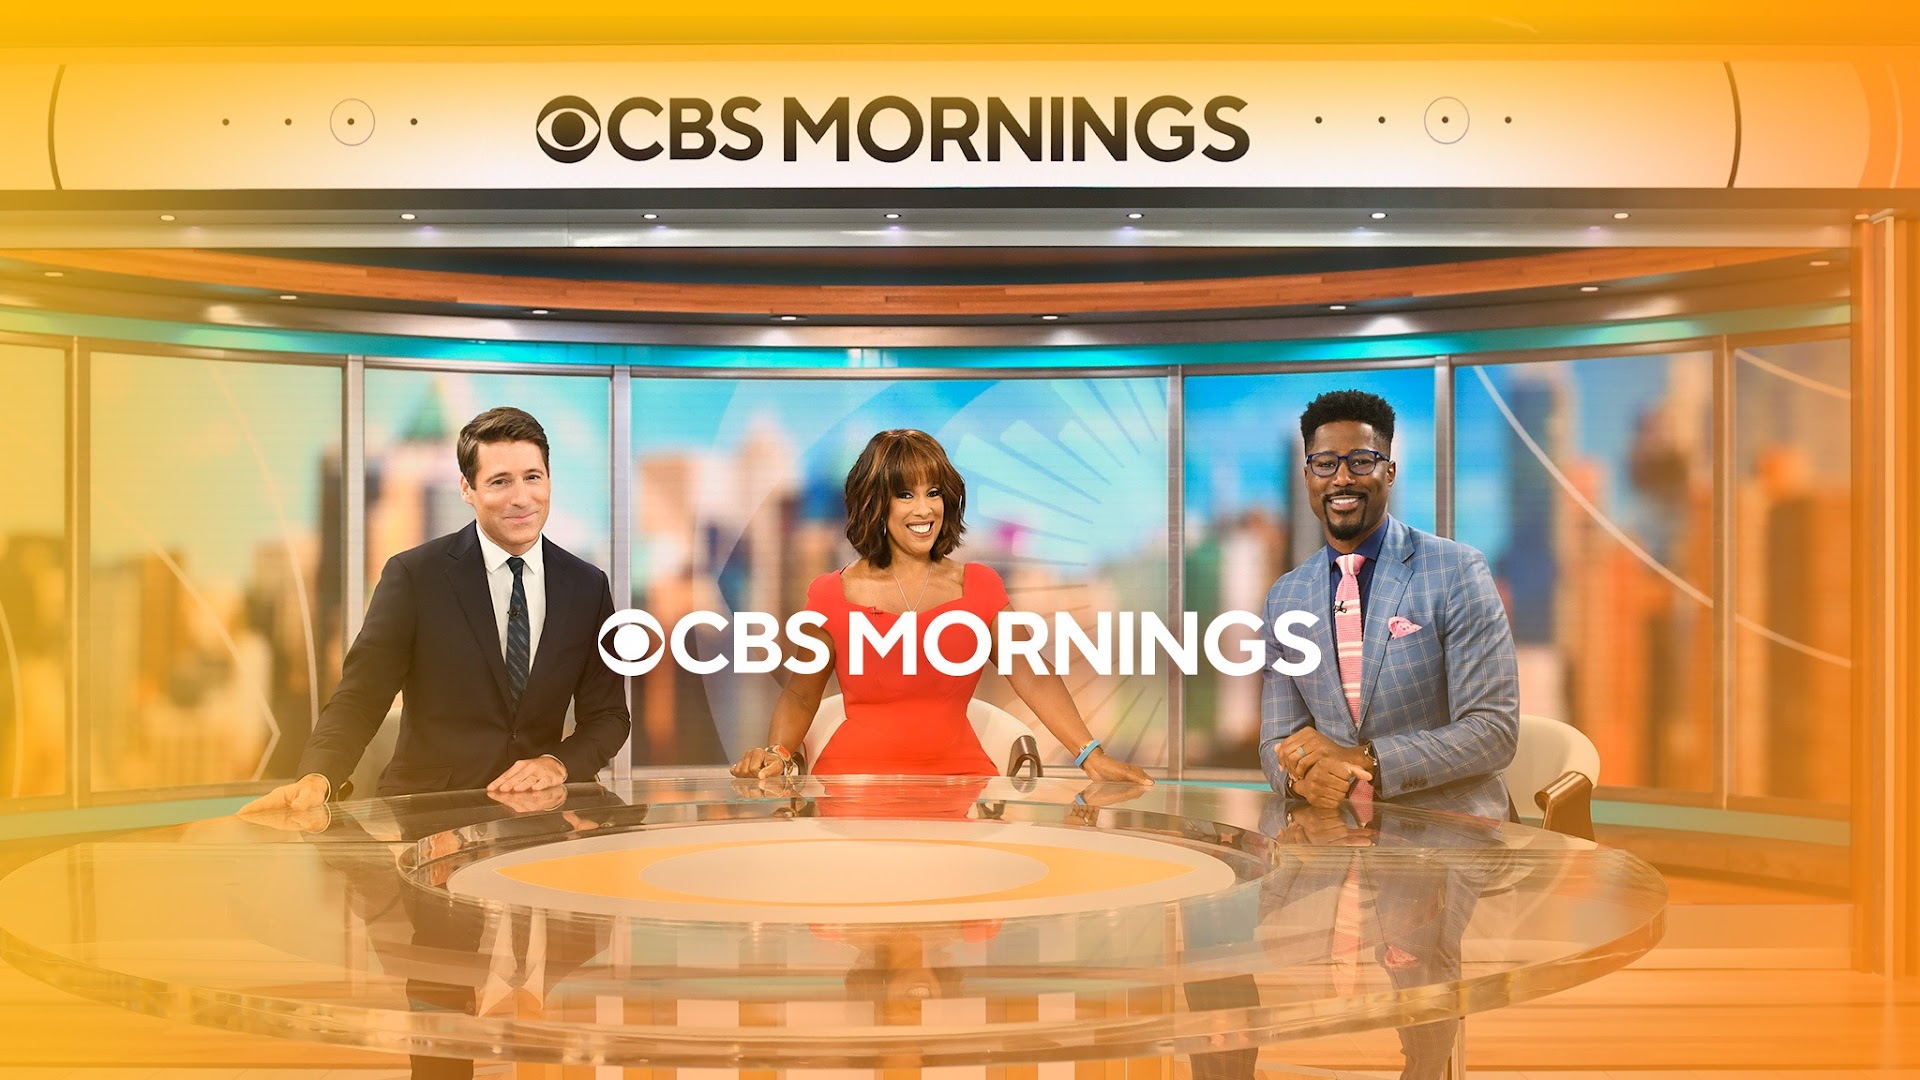 CBS Mornings - Daily news and features with hosts Gayle King, Tony Dokoupil  and Nate Burleson